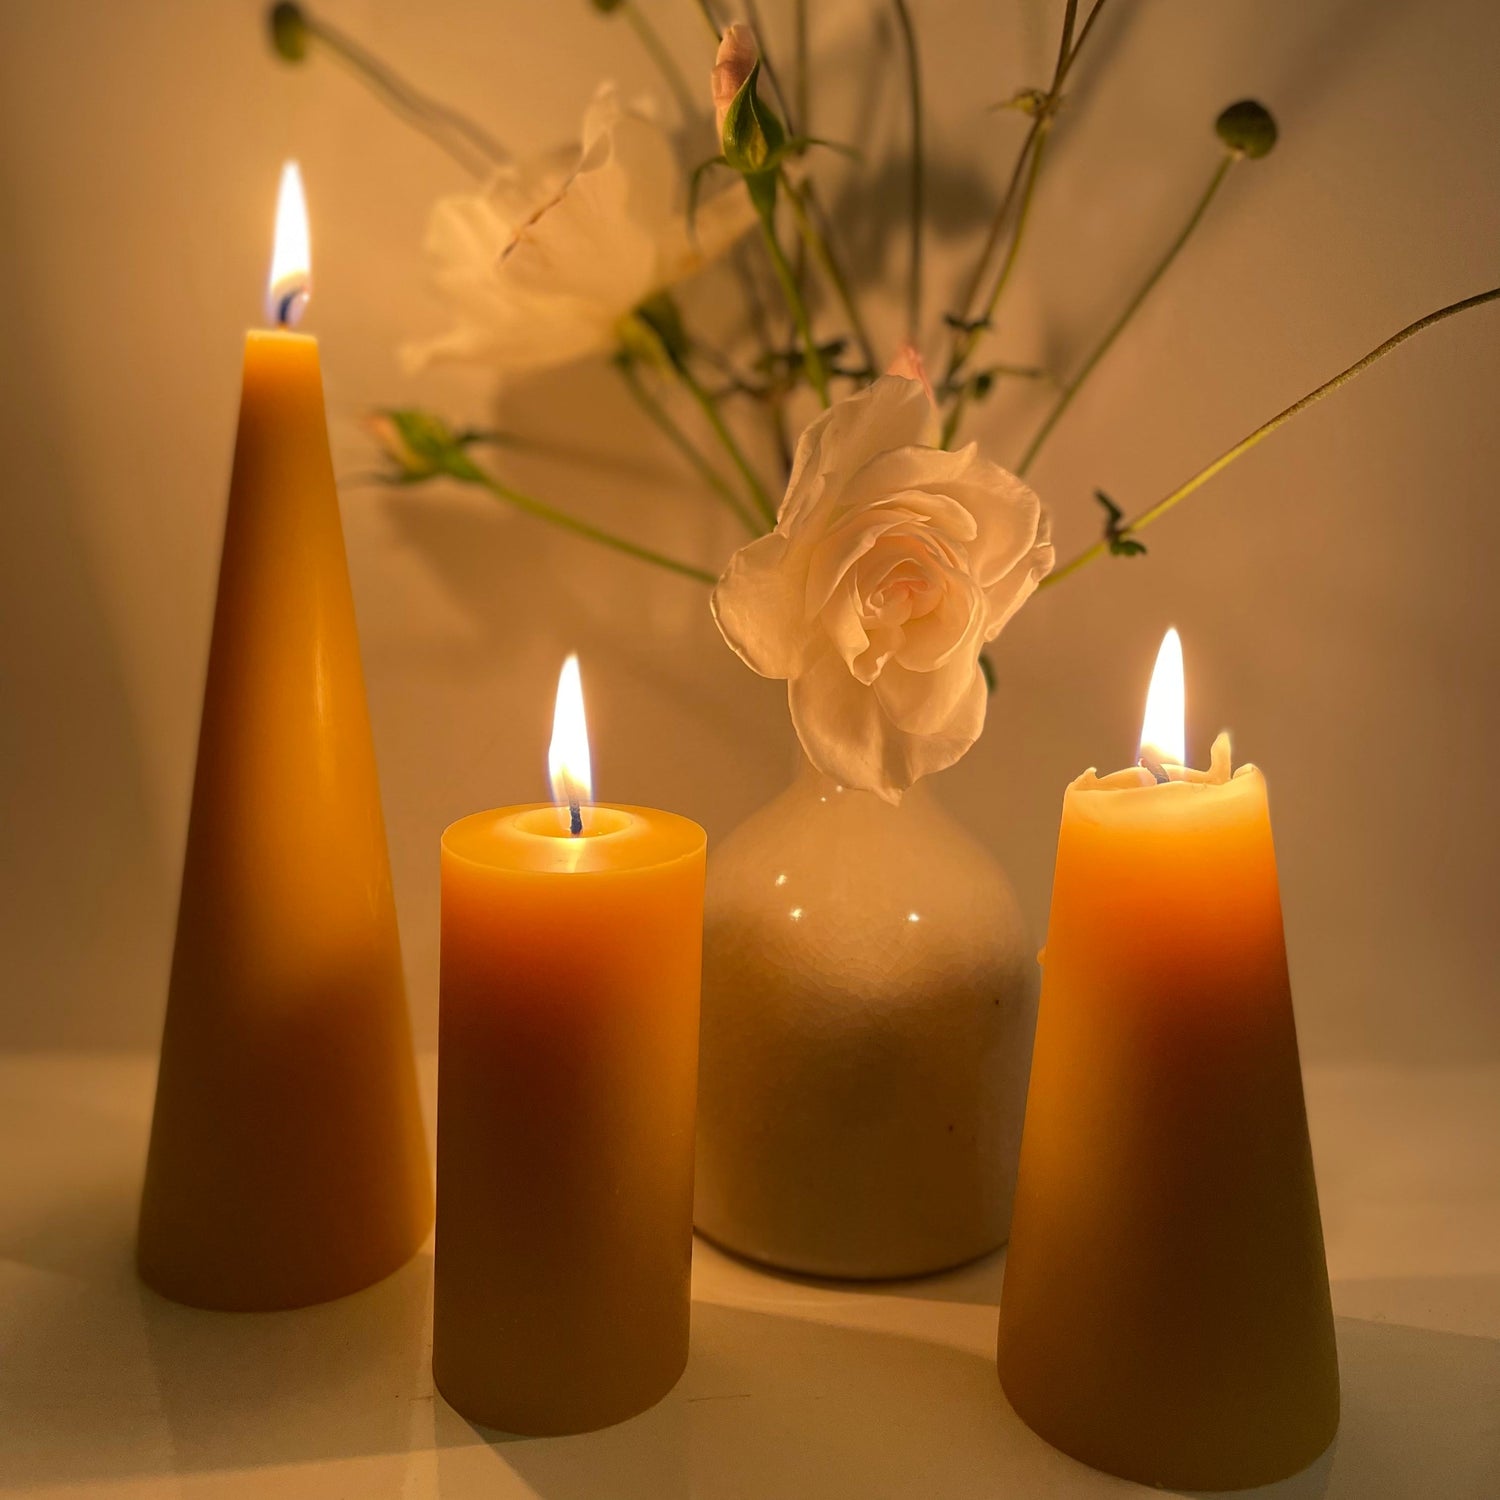 Do Beeswax candles burn longer and brighter?